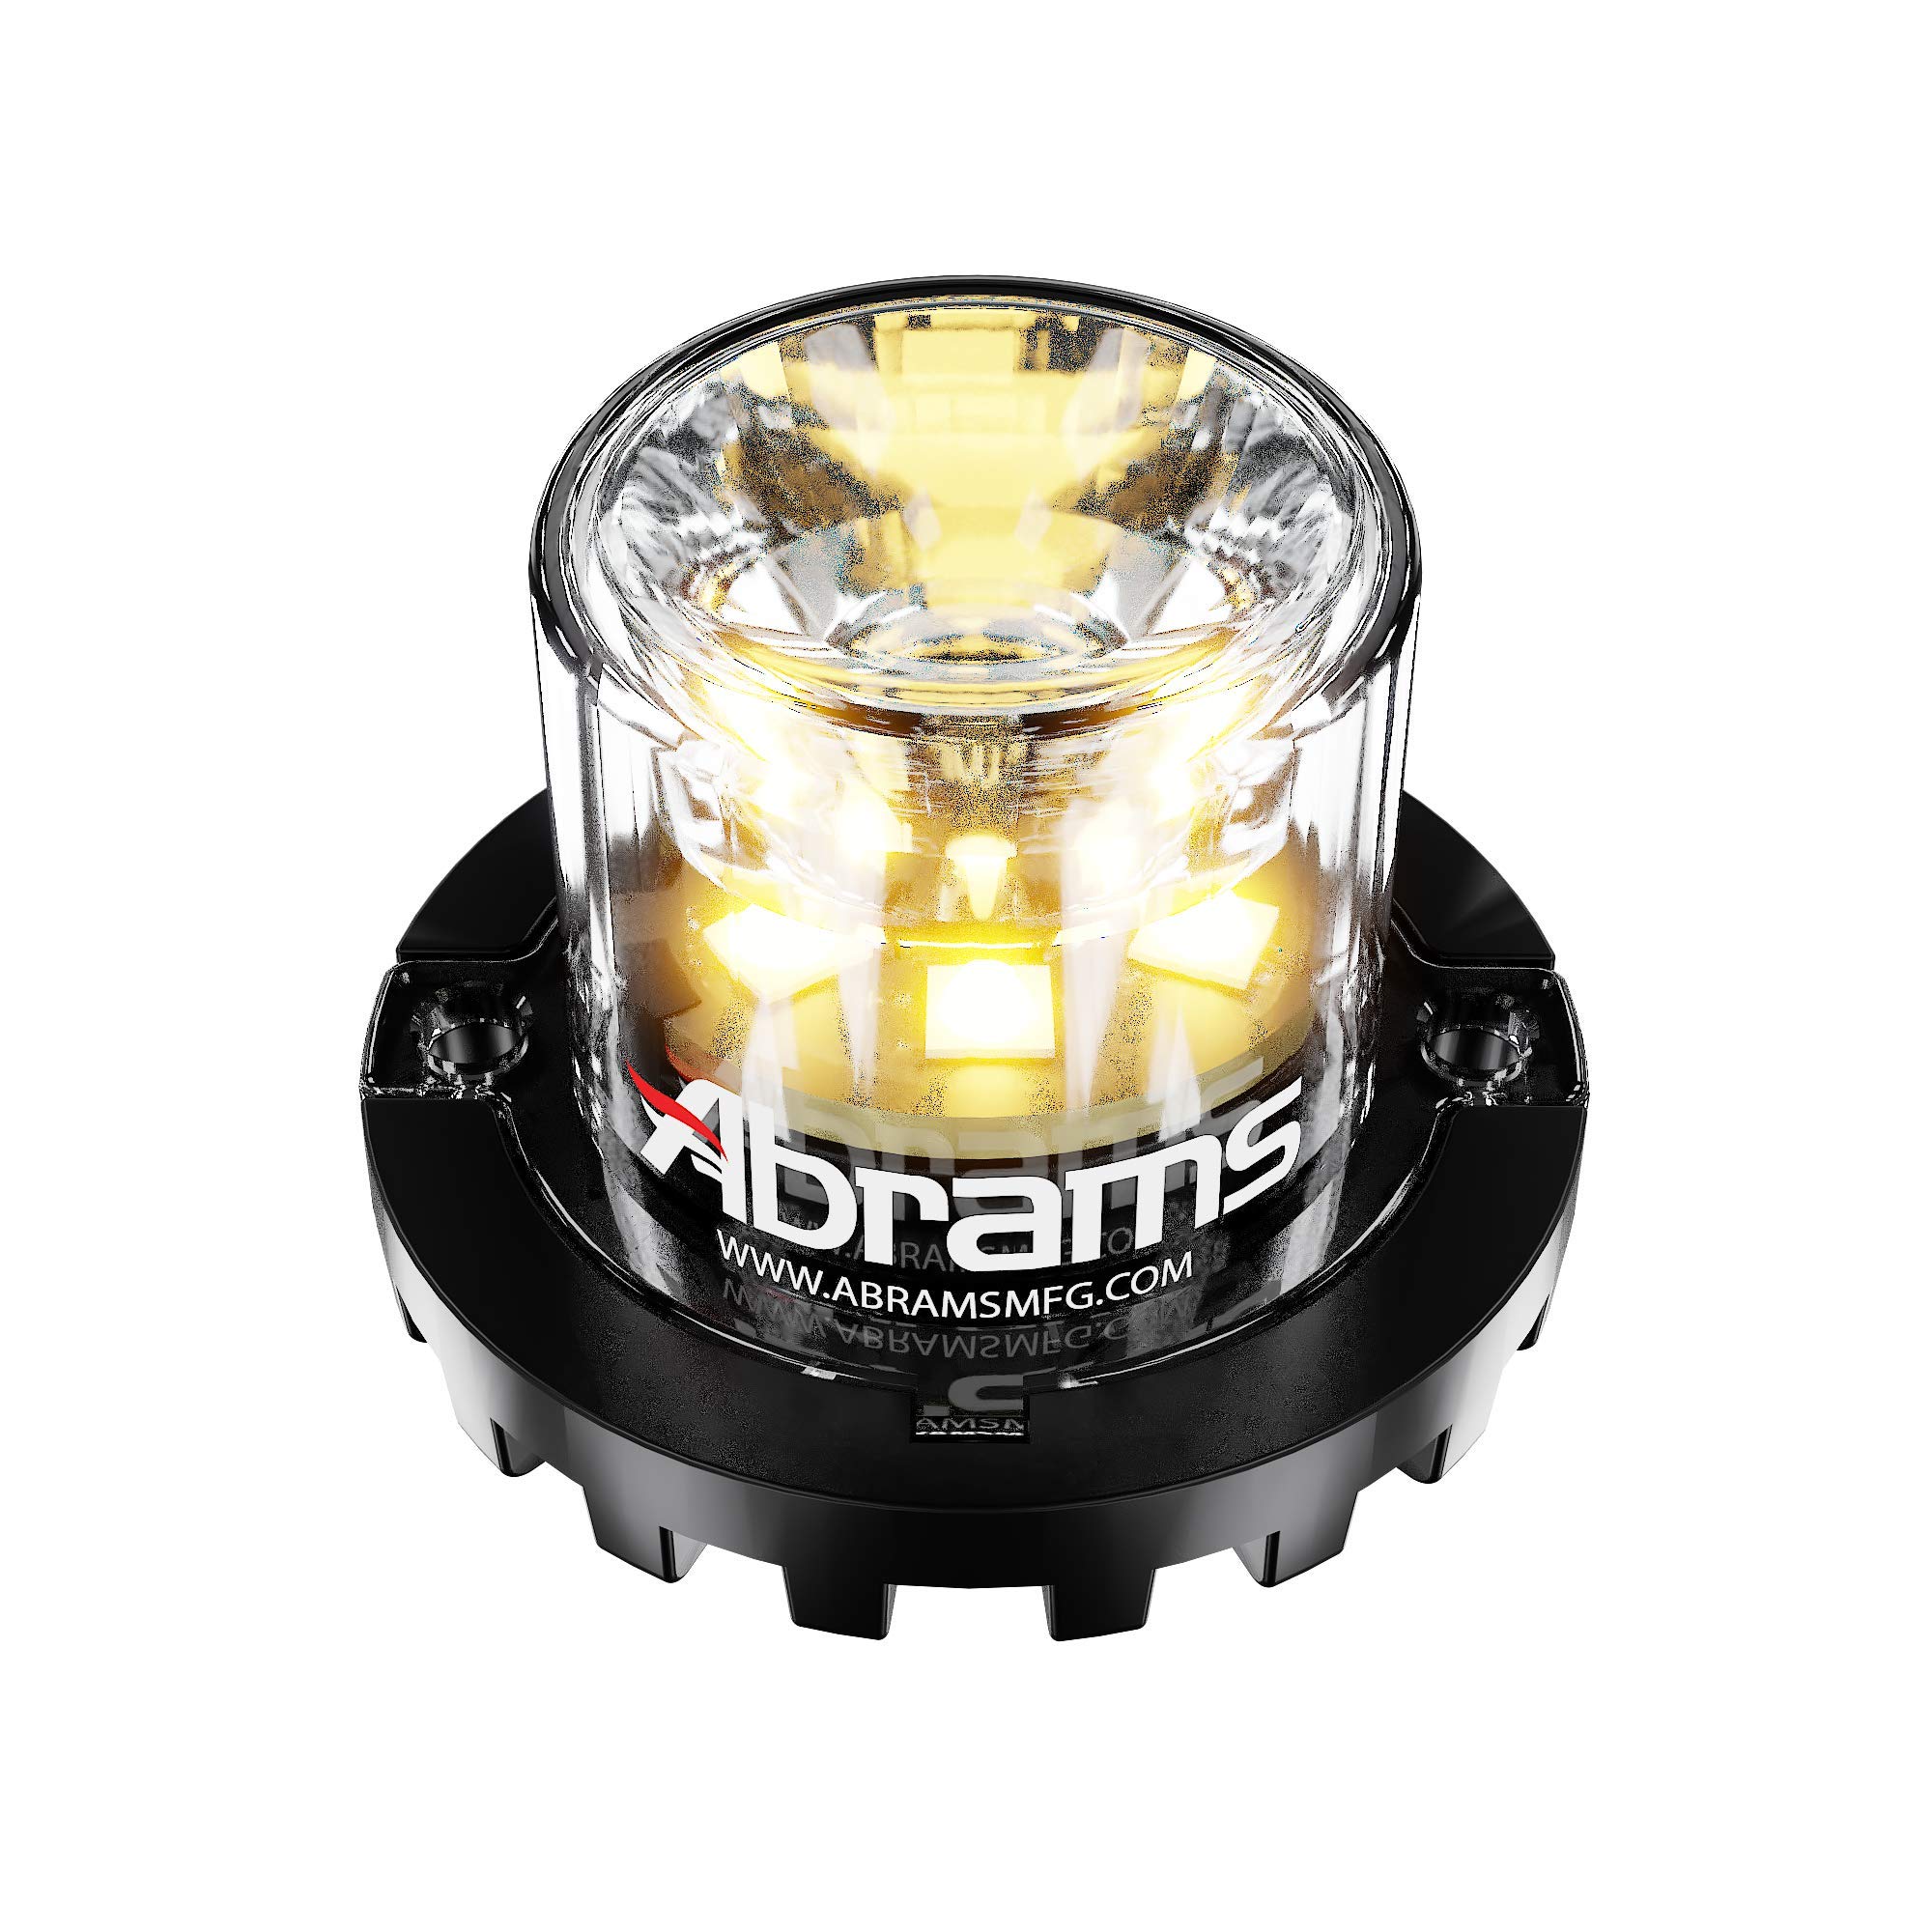 Abrams SAE Class-1 Blaster 360 (Amber/Amber) 18W - 6 LED Tow Truck Construction Vehicle LED Hideaway Surface Mount Strobe Warning Light